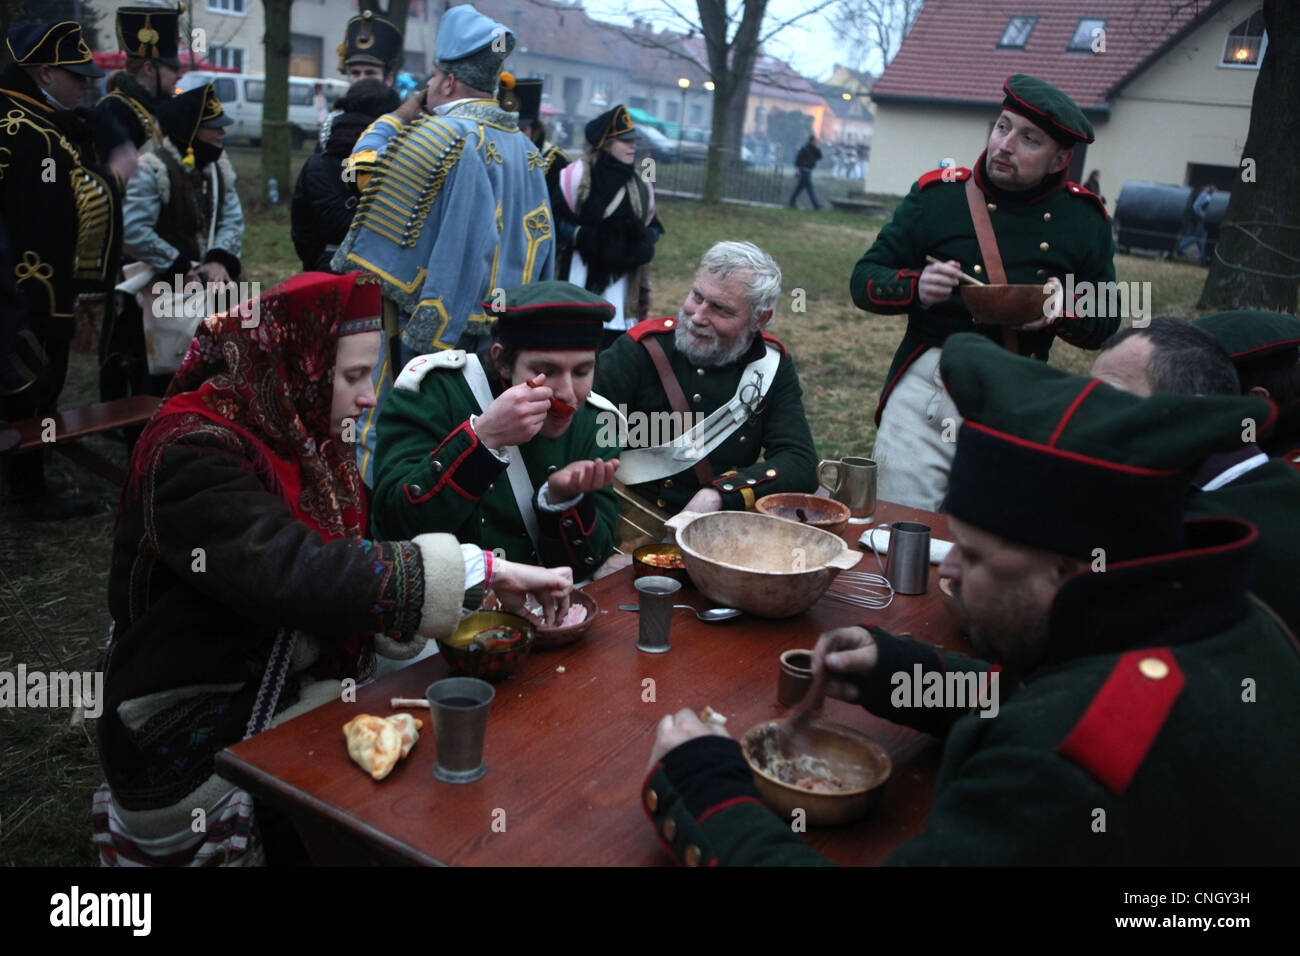 Russian soldiers eat in the military camp in Tvarozna, Czech Republic. Re-enactment of the Battle of Austerlitz (1805). Stock Photo